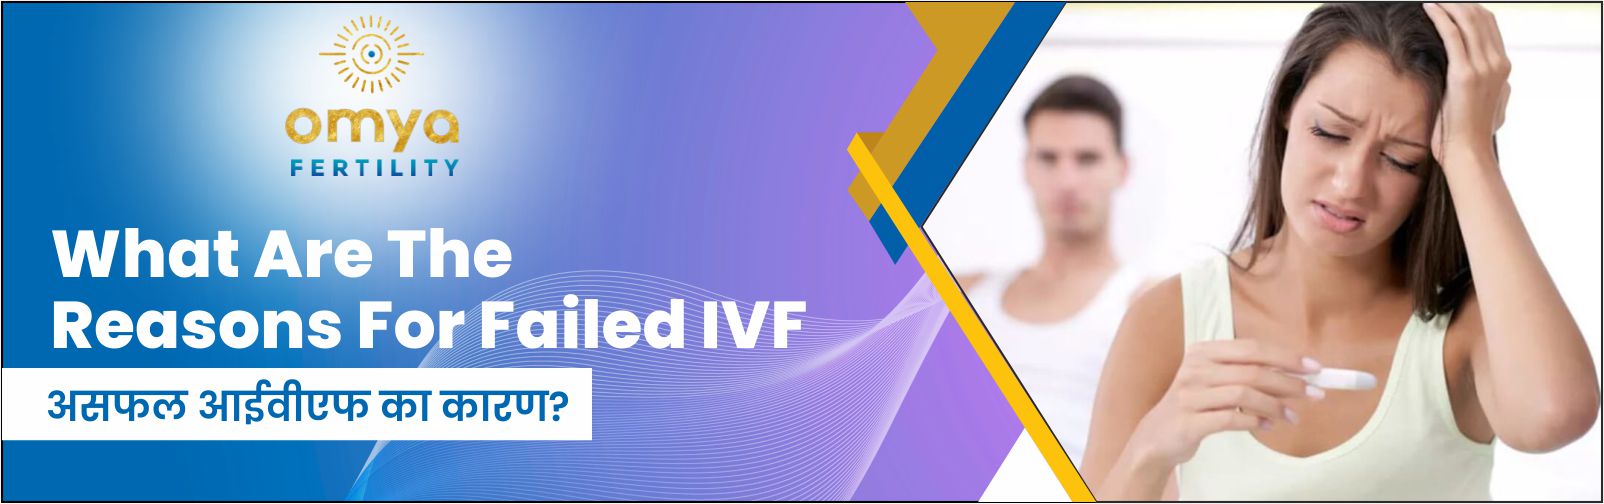 What Are The Reasons For Failed IVF: असफल आईवीएफ का कारण?